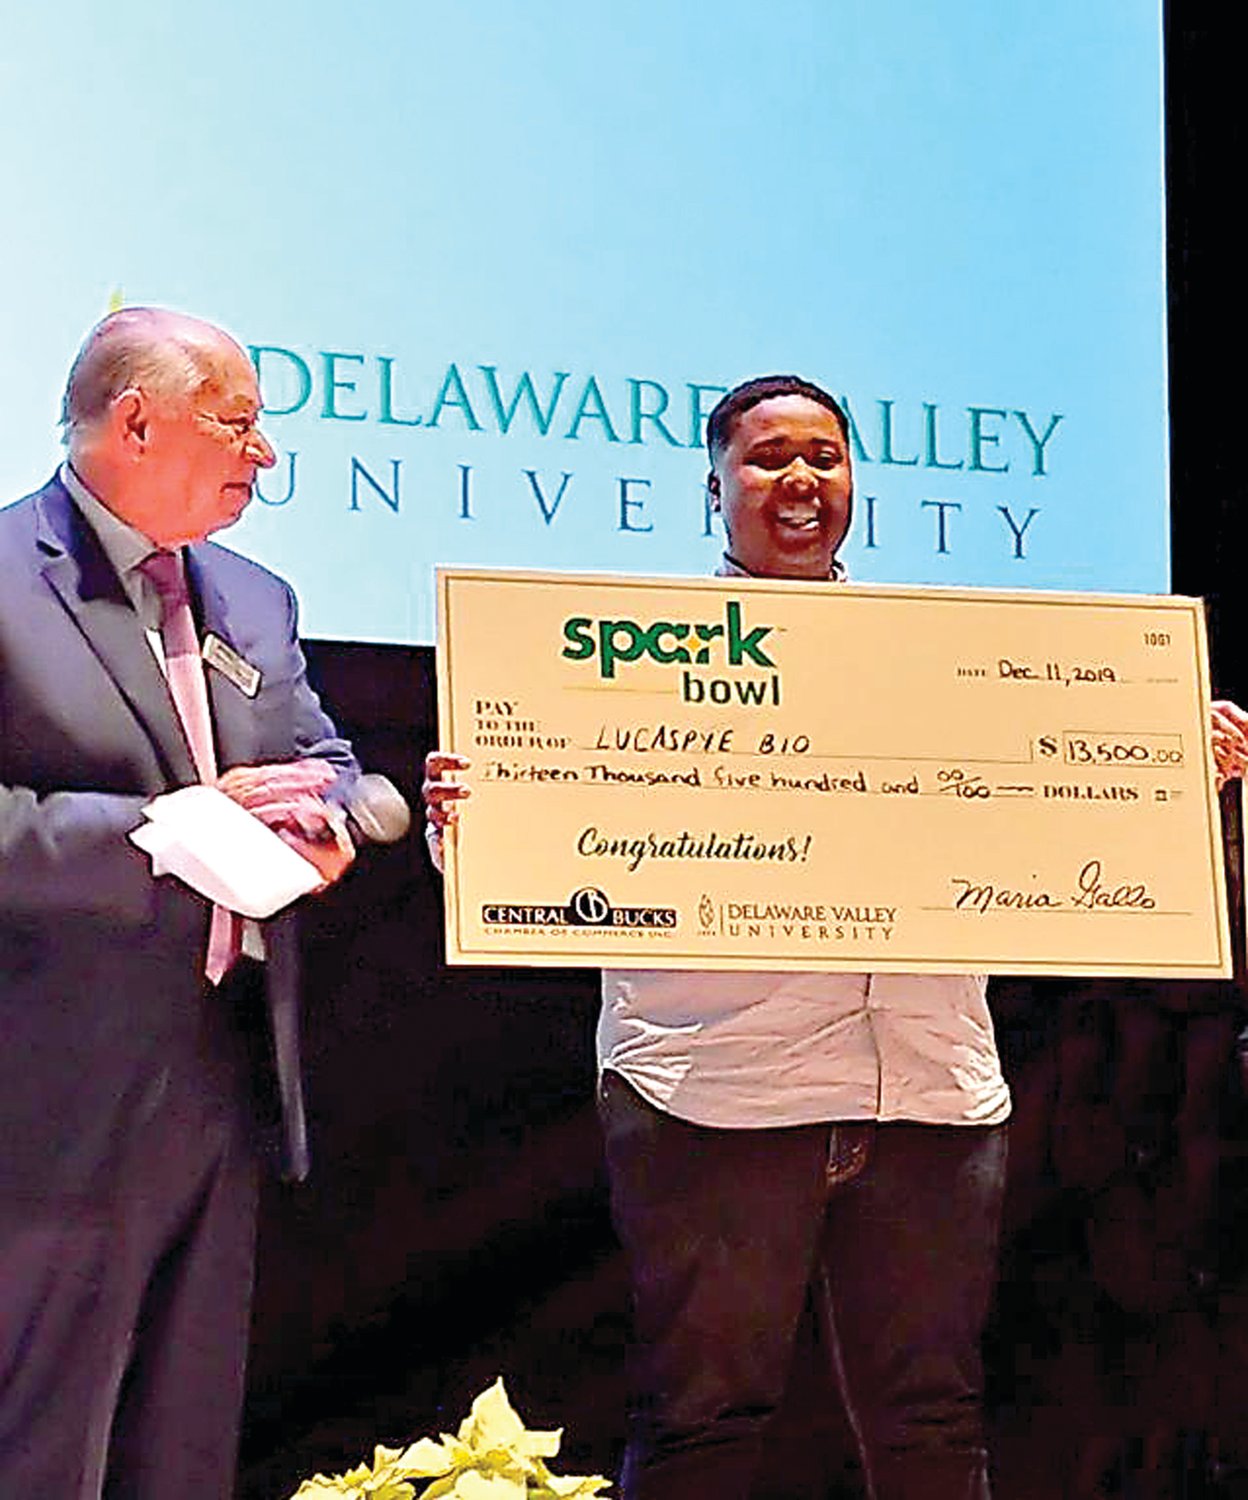 A check for $13,5000 is presented to SparkBowl winner LucasPye BIO.